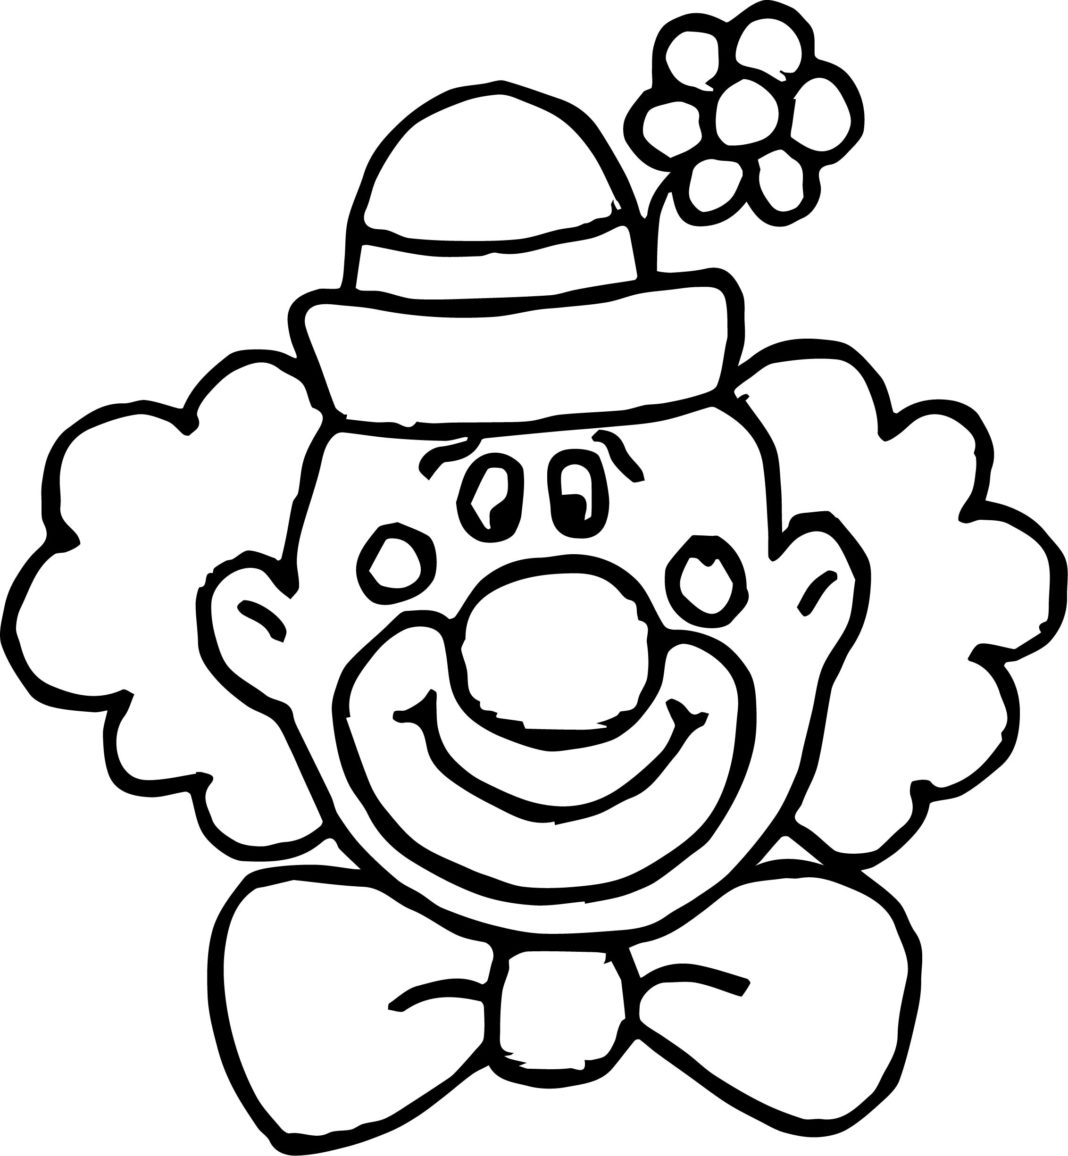 clown-face-coloring-book-to-print-and-online